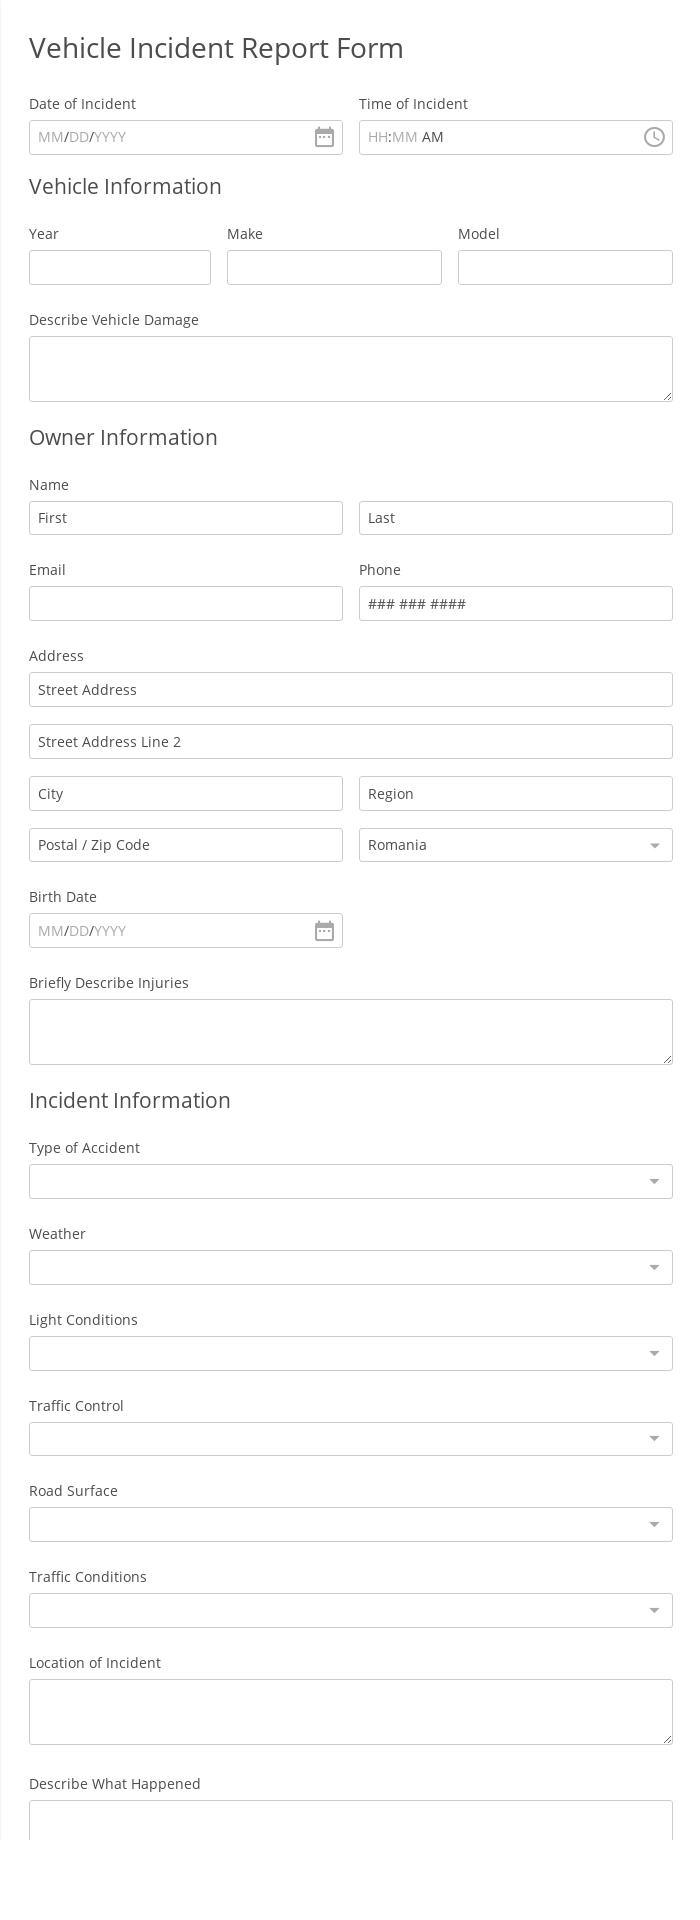 Vehicle Incident Report Form Template  22 Form Builder Throughout It Incident Report Template